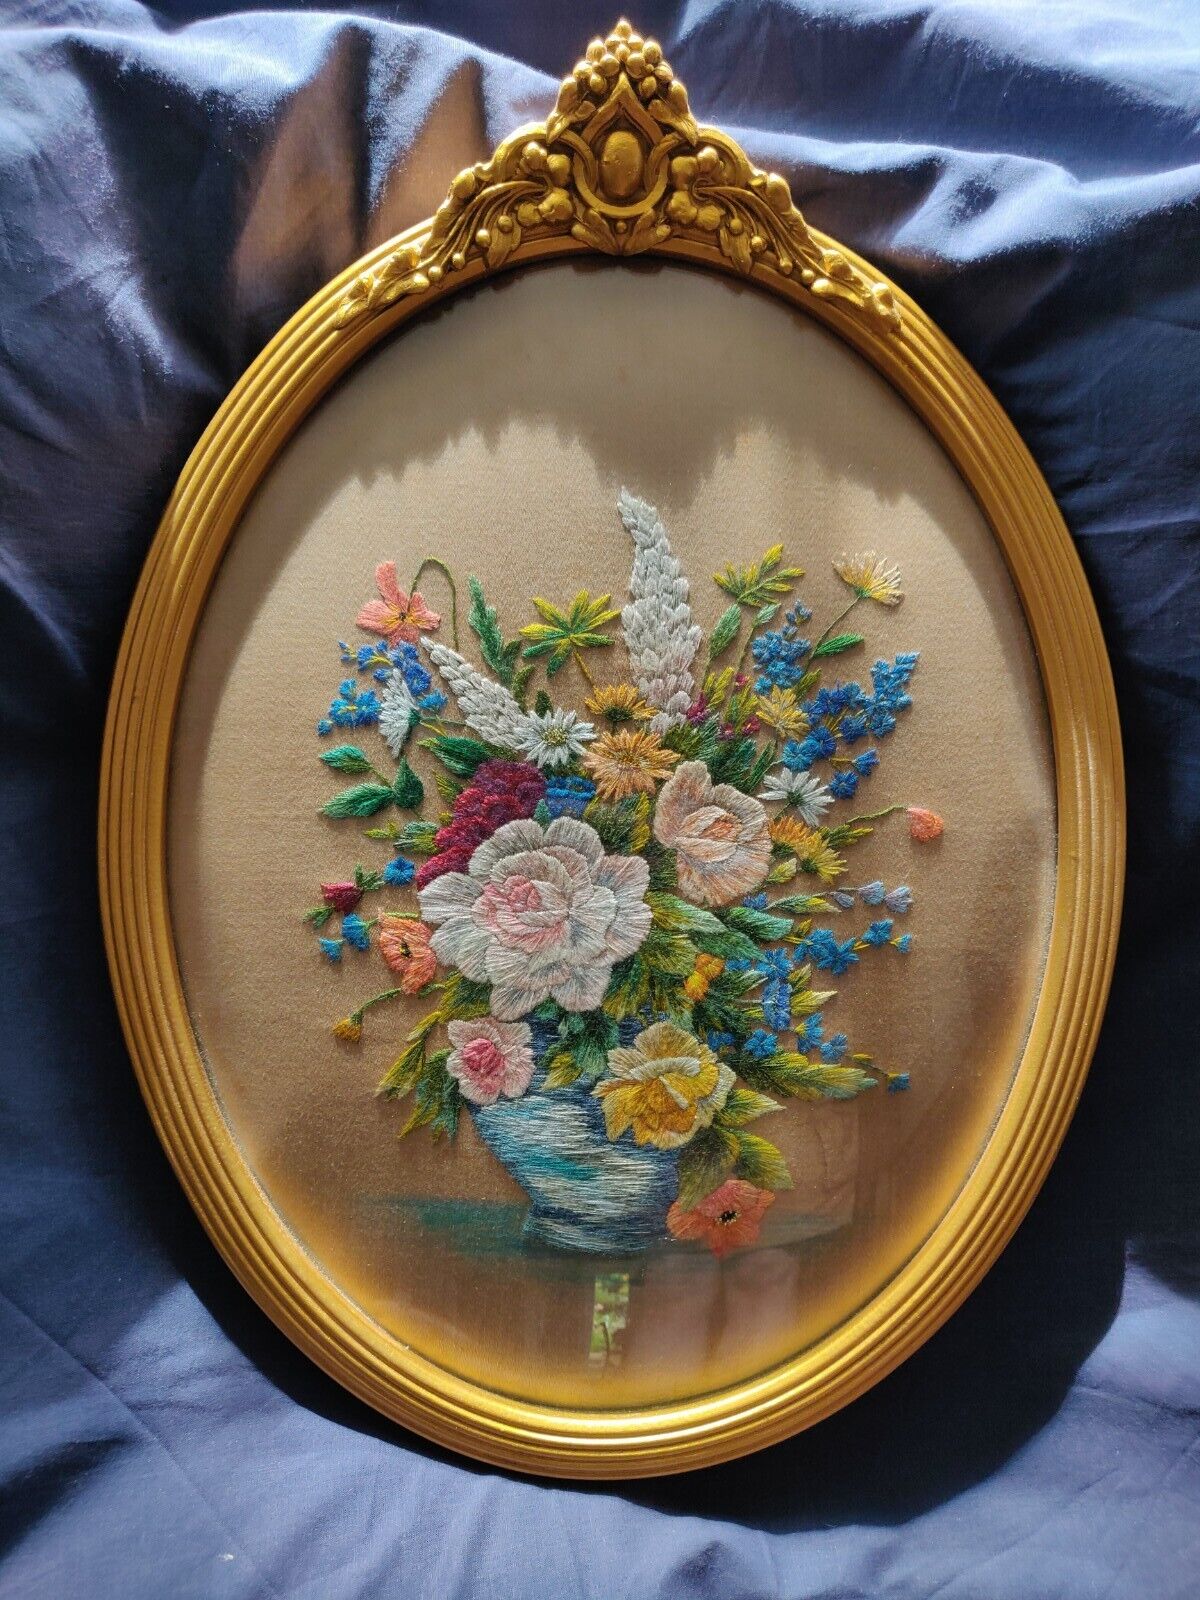 Antique Valuations: Antique Silk Embroidery in Domed Glass Frame (Possibly Victorian) 